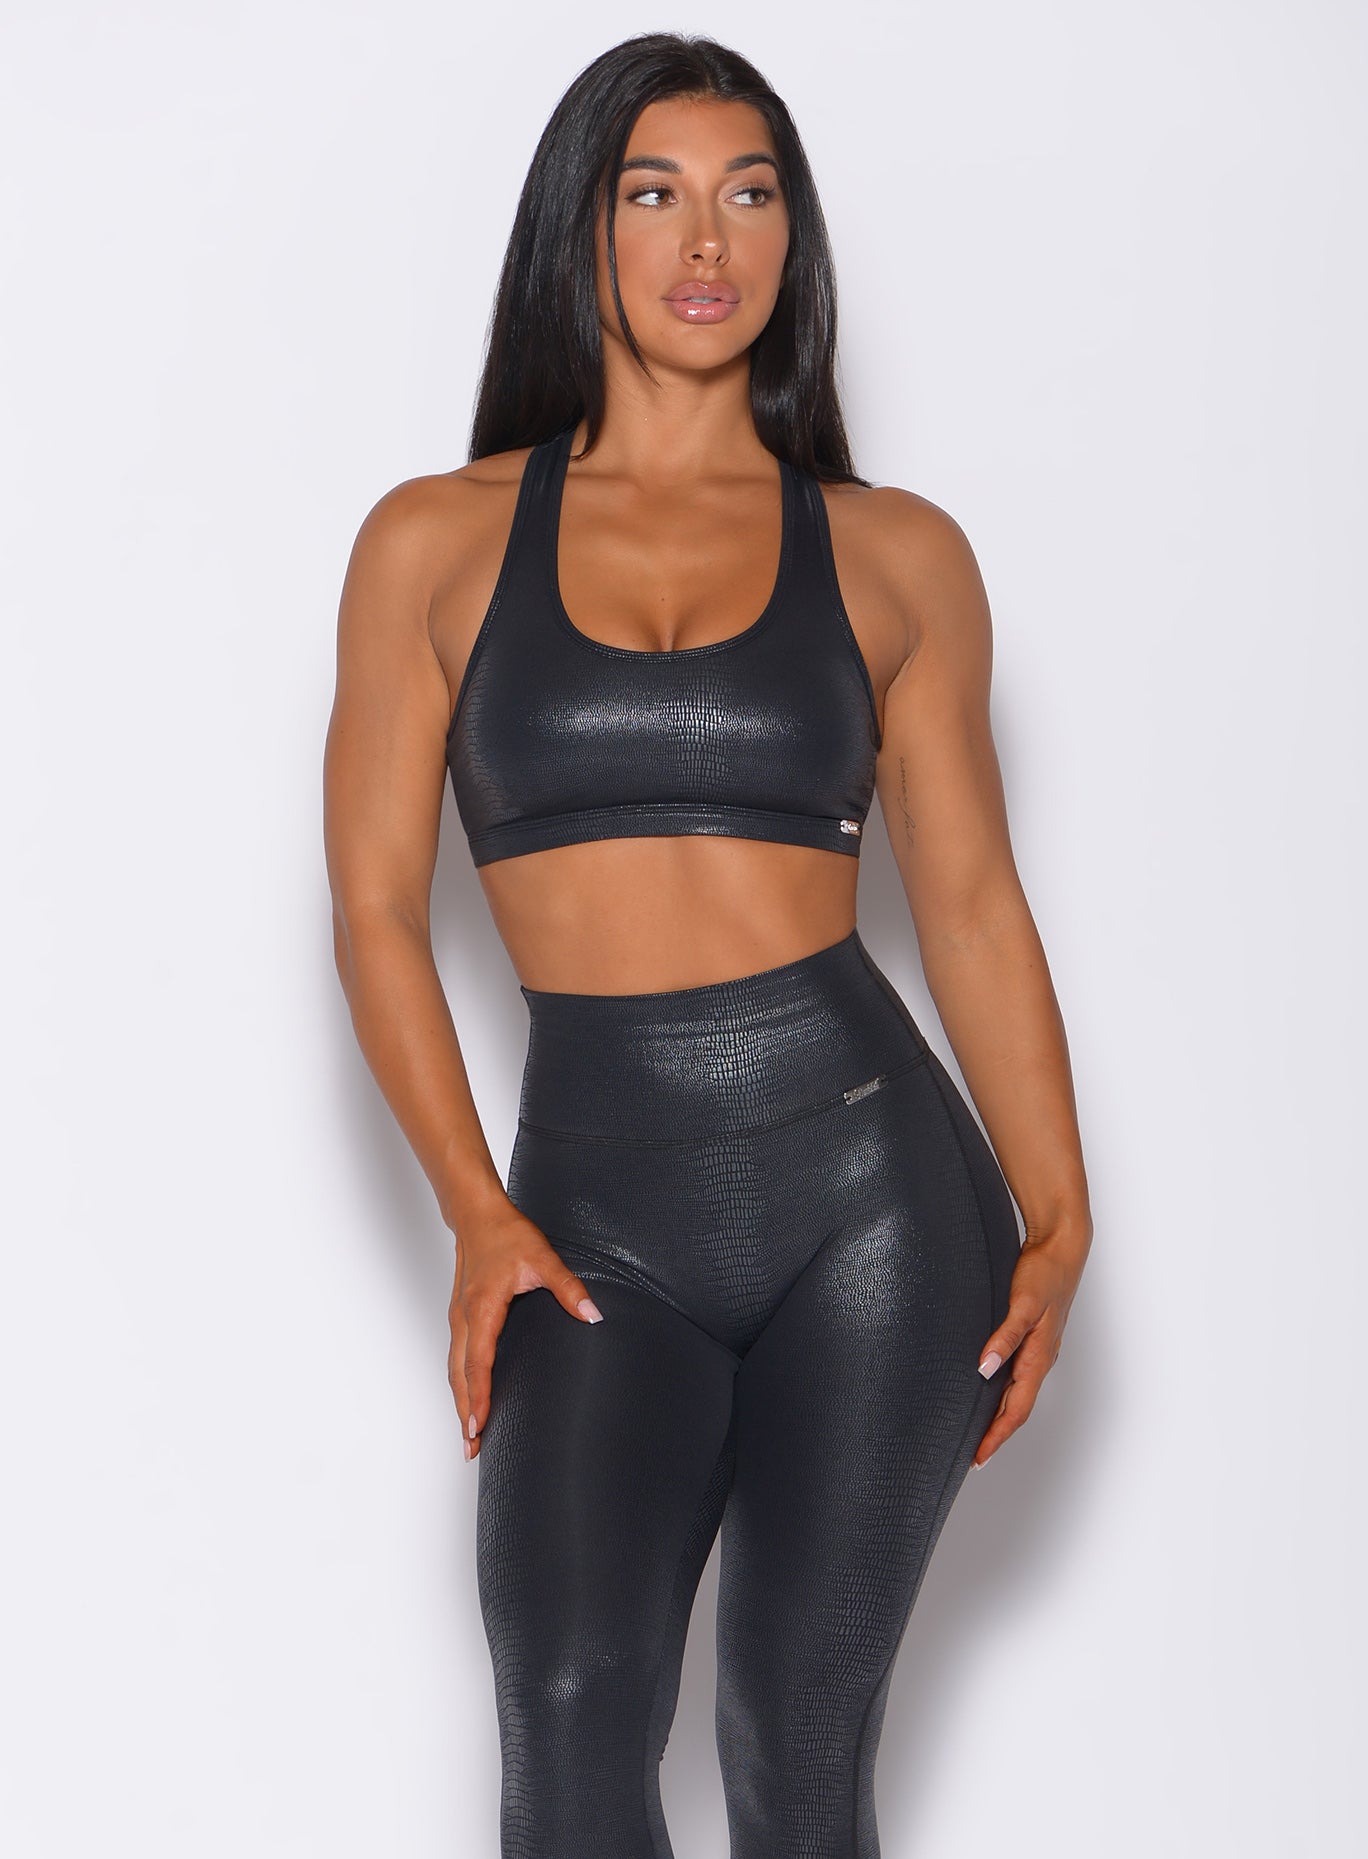 Front profile view of a model facing to her left wearing our shine sports bra in black python color and a matching leggings